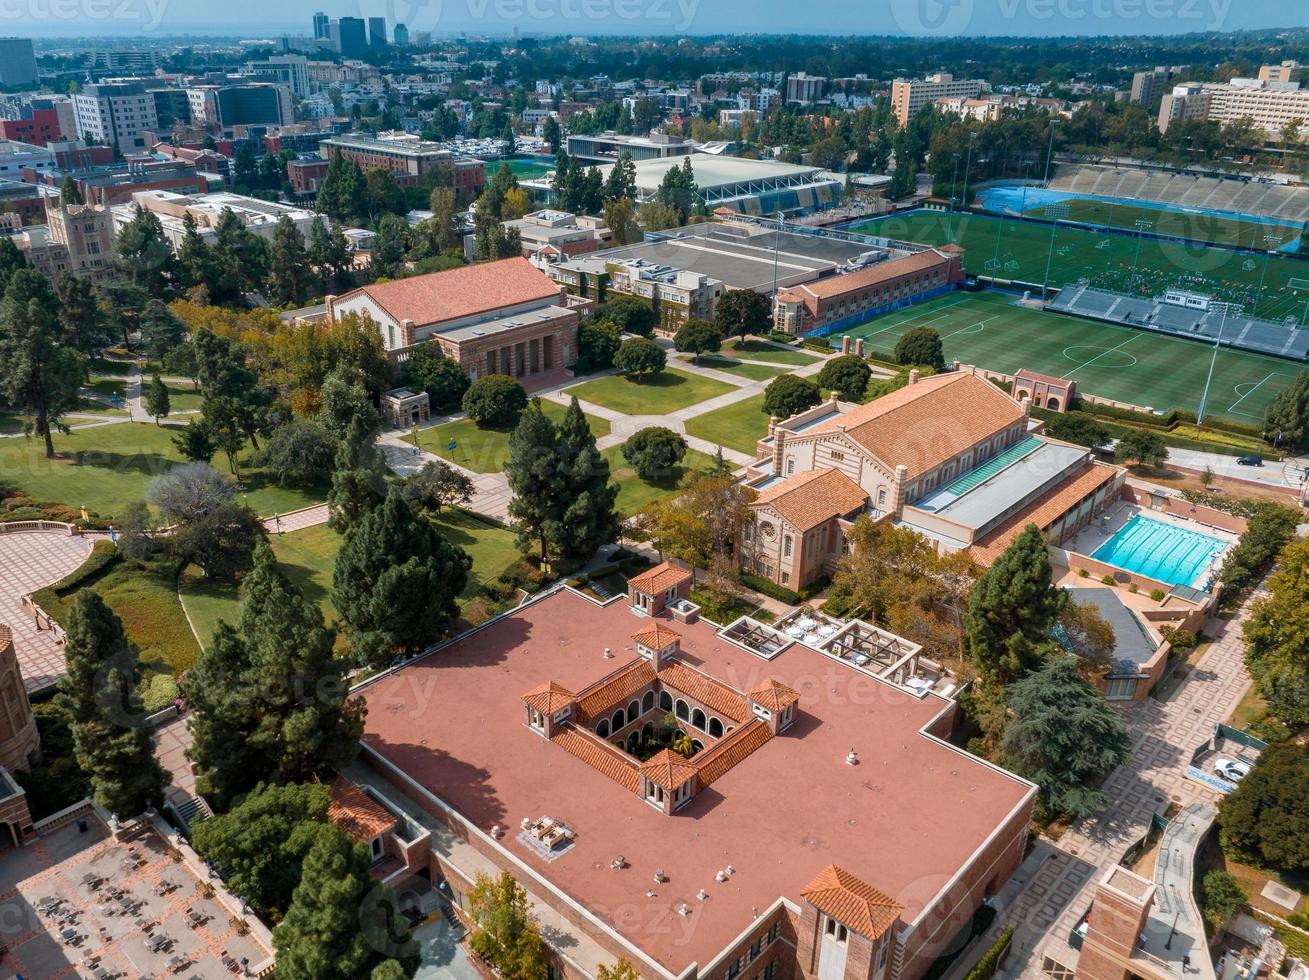 Aerial view of the campus at the University of California, Los Angeles UCLA photo